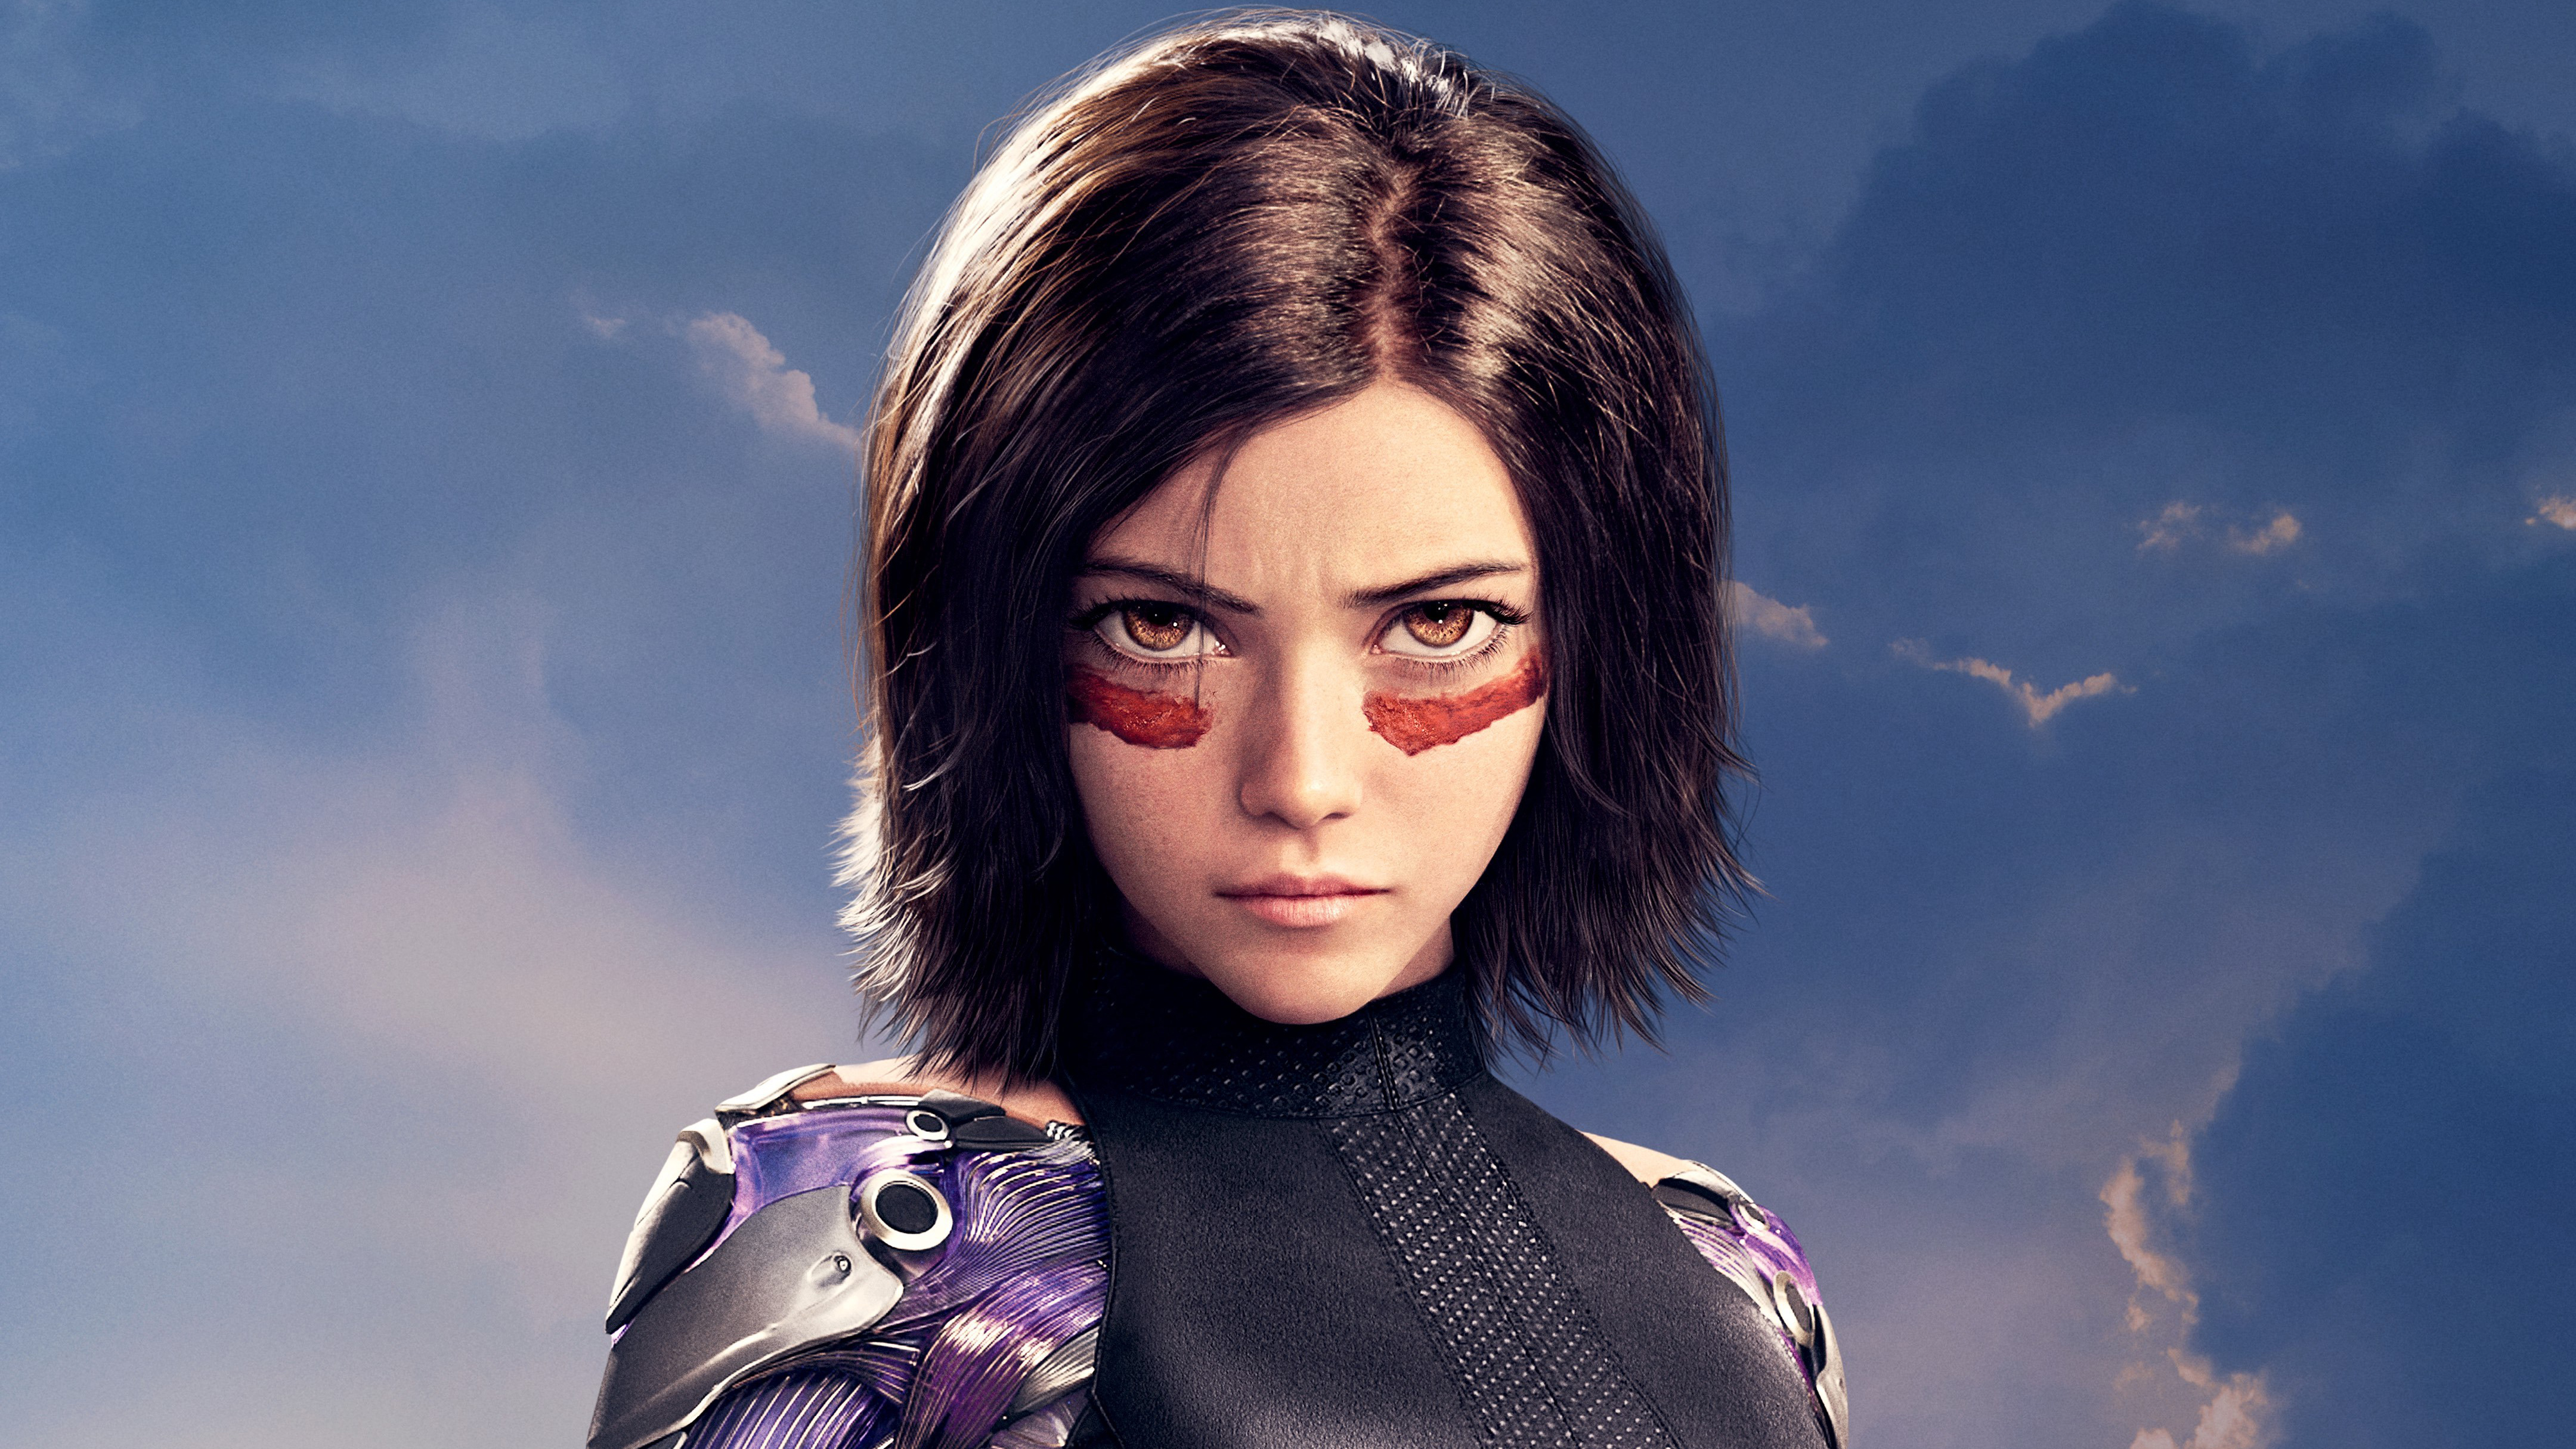 Alita battle angel 2 potential release date, news and more